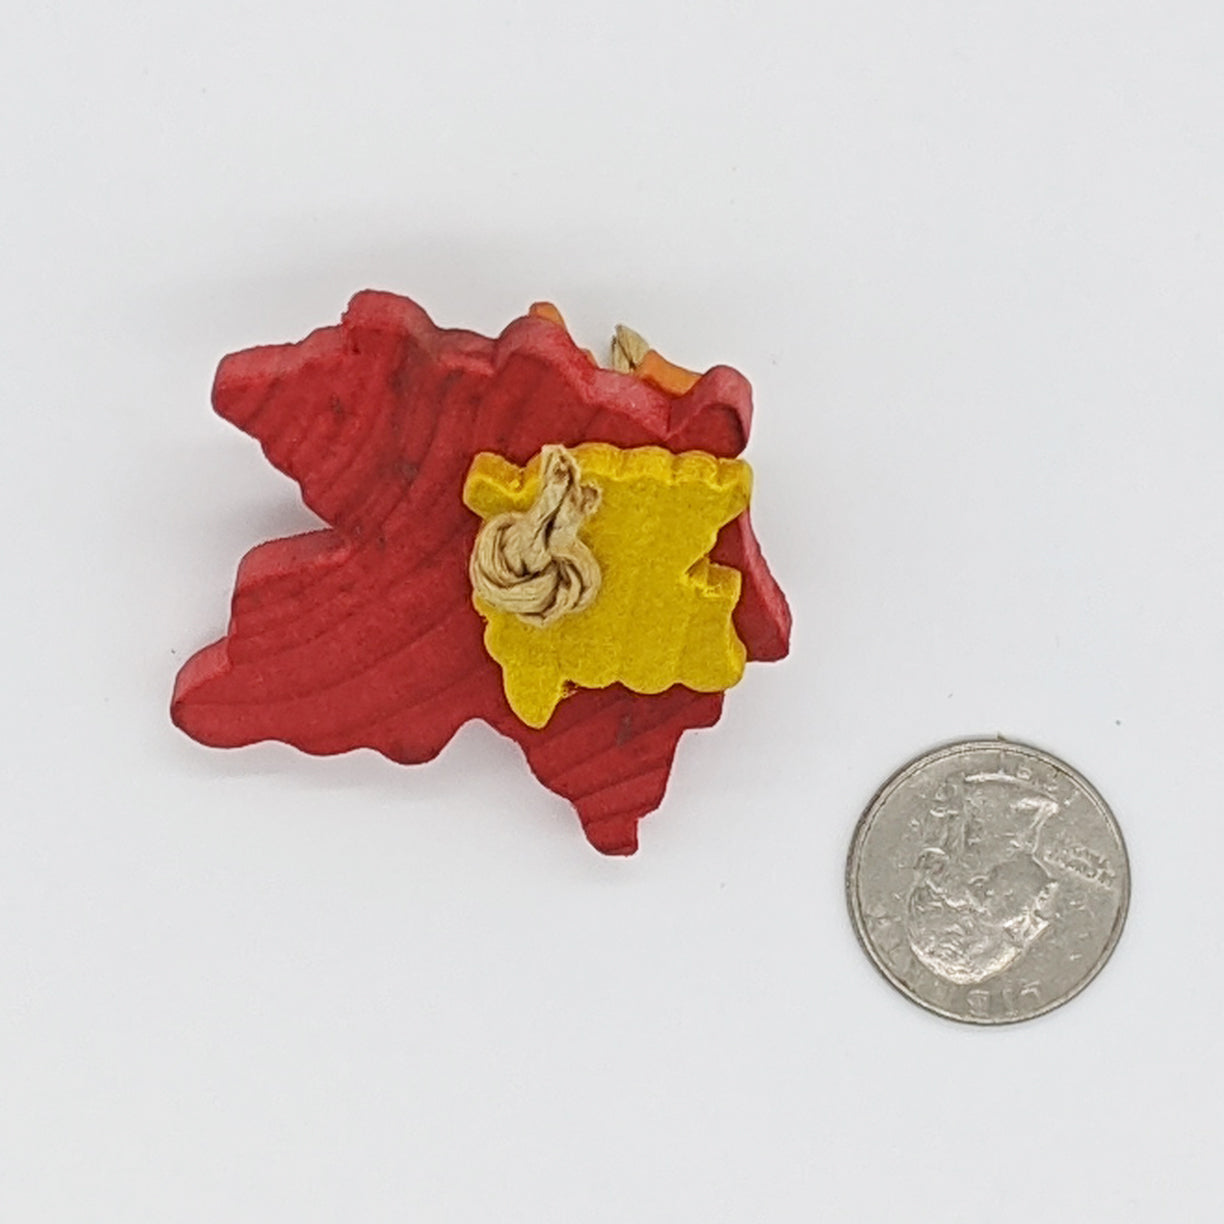 A natural hardwood bird toy. Picture shows a red large maple leaf with a smaller yellow and orange leaf tied on either side with paper rope. Leaves are about 1/4" thick.  Shown with a US quarter for scale